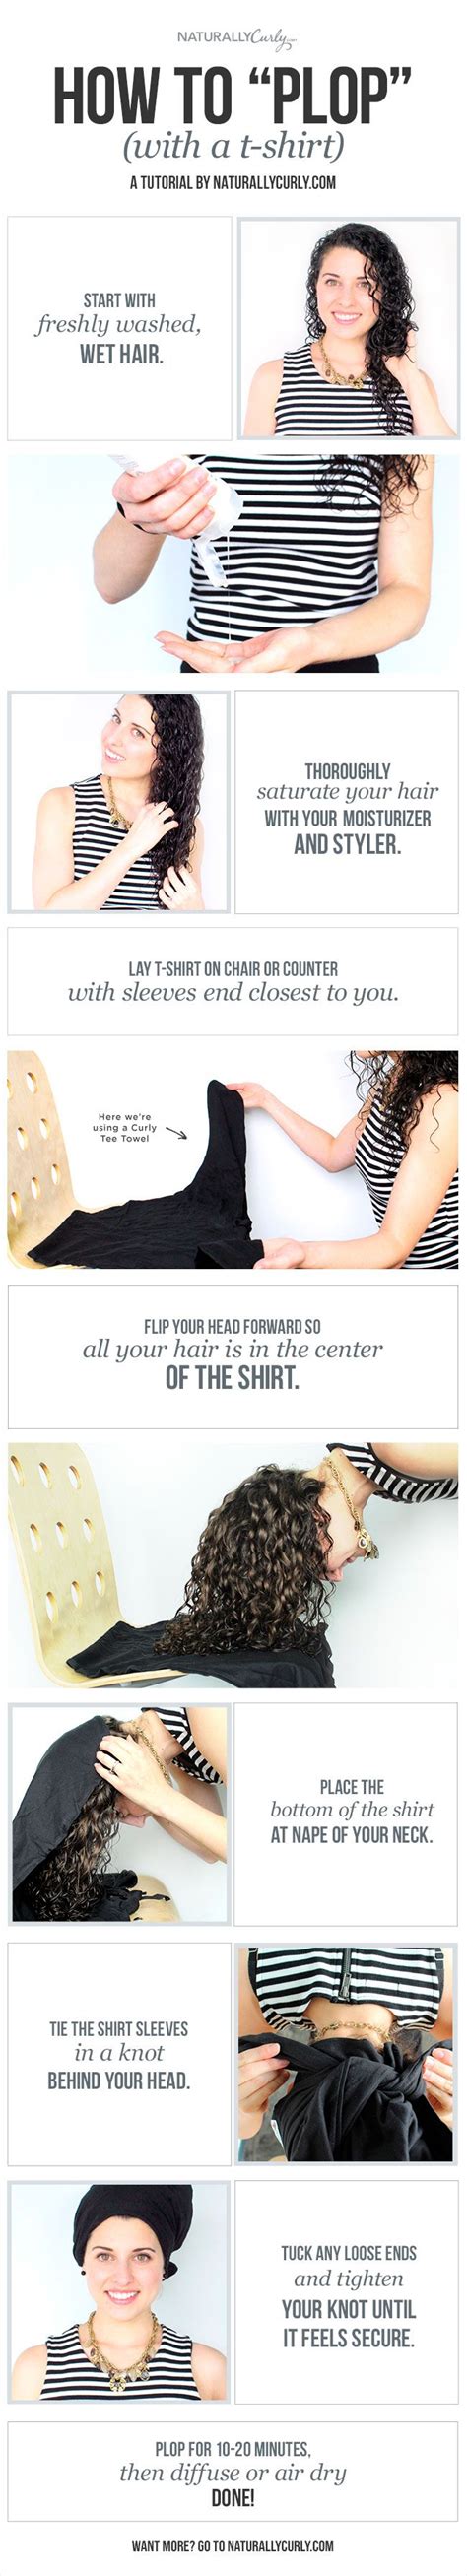 how to plop curly hair a curly girl s guide